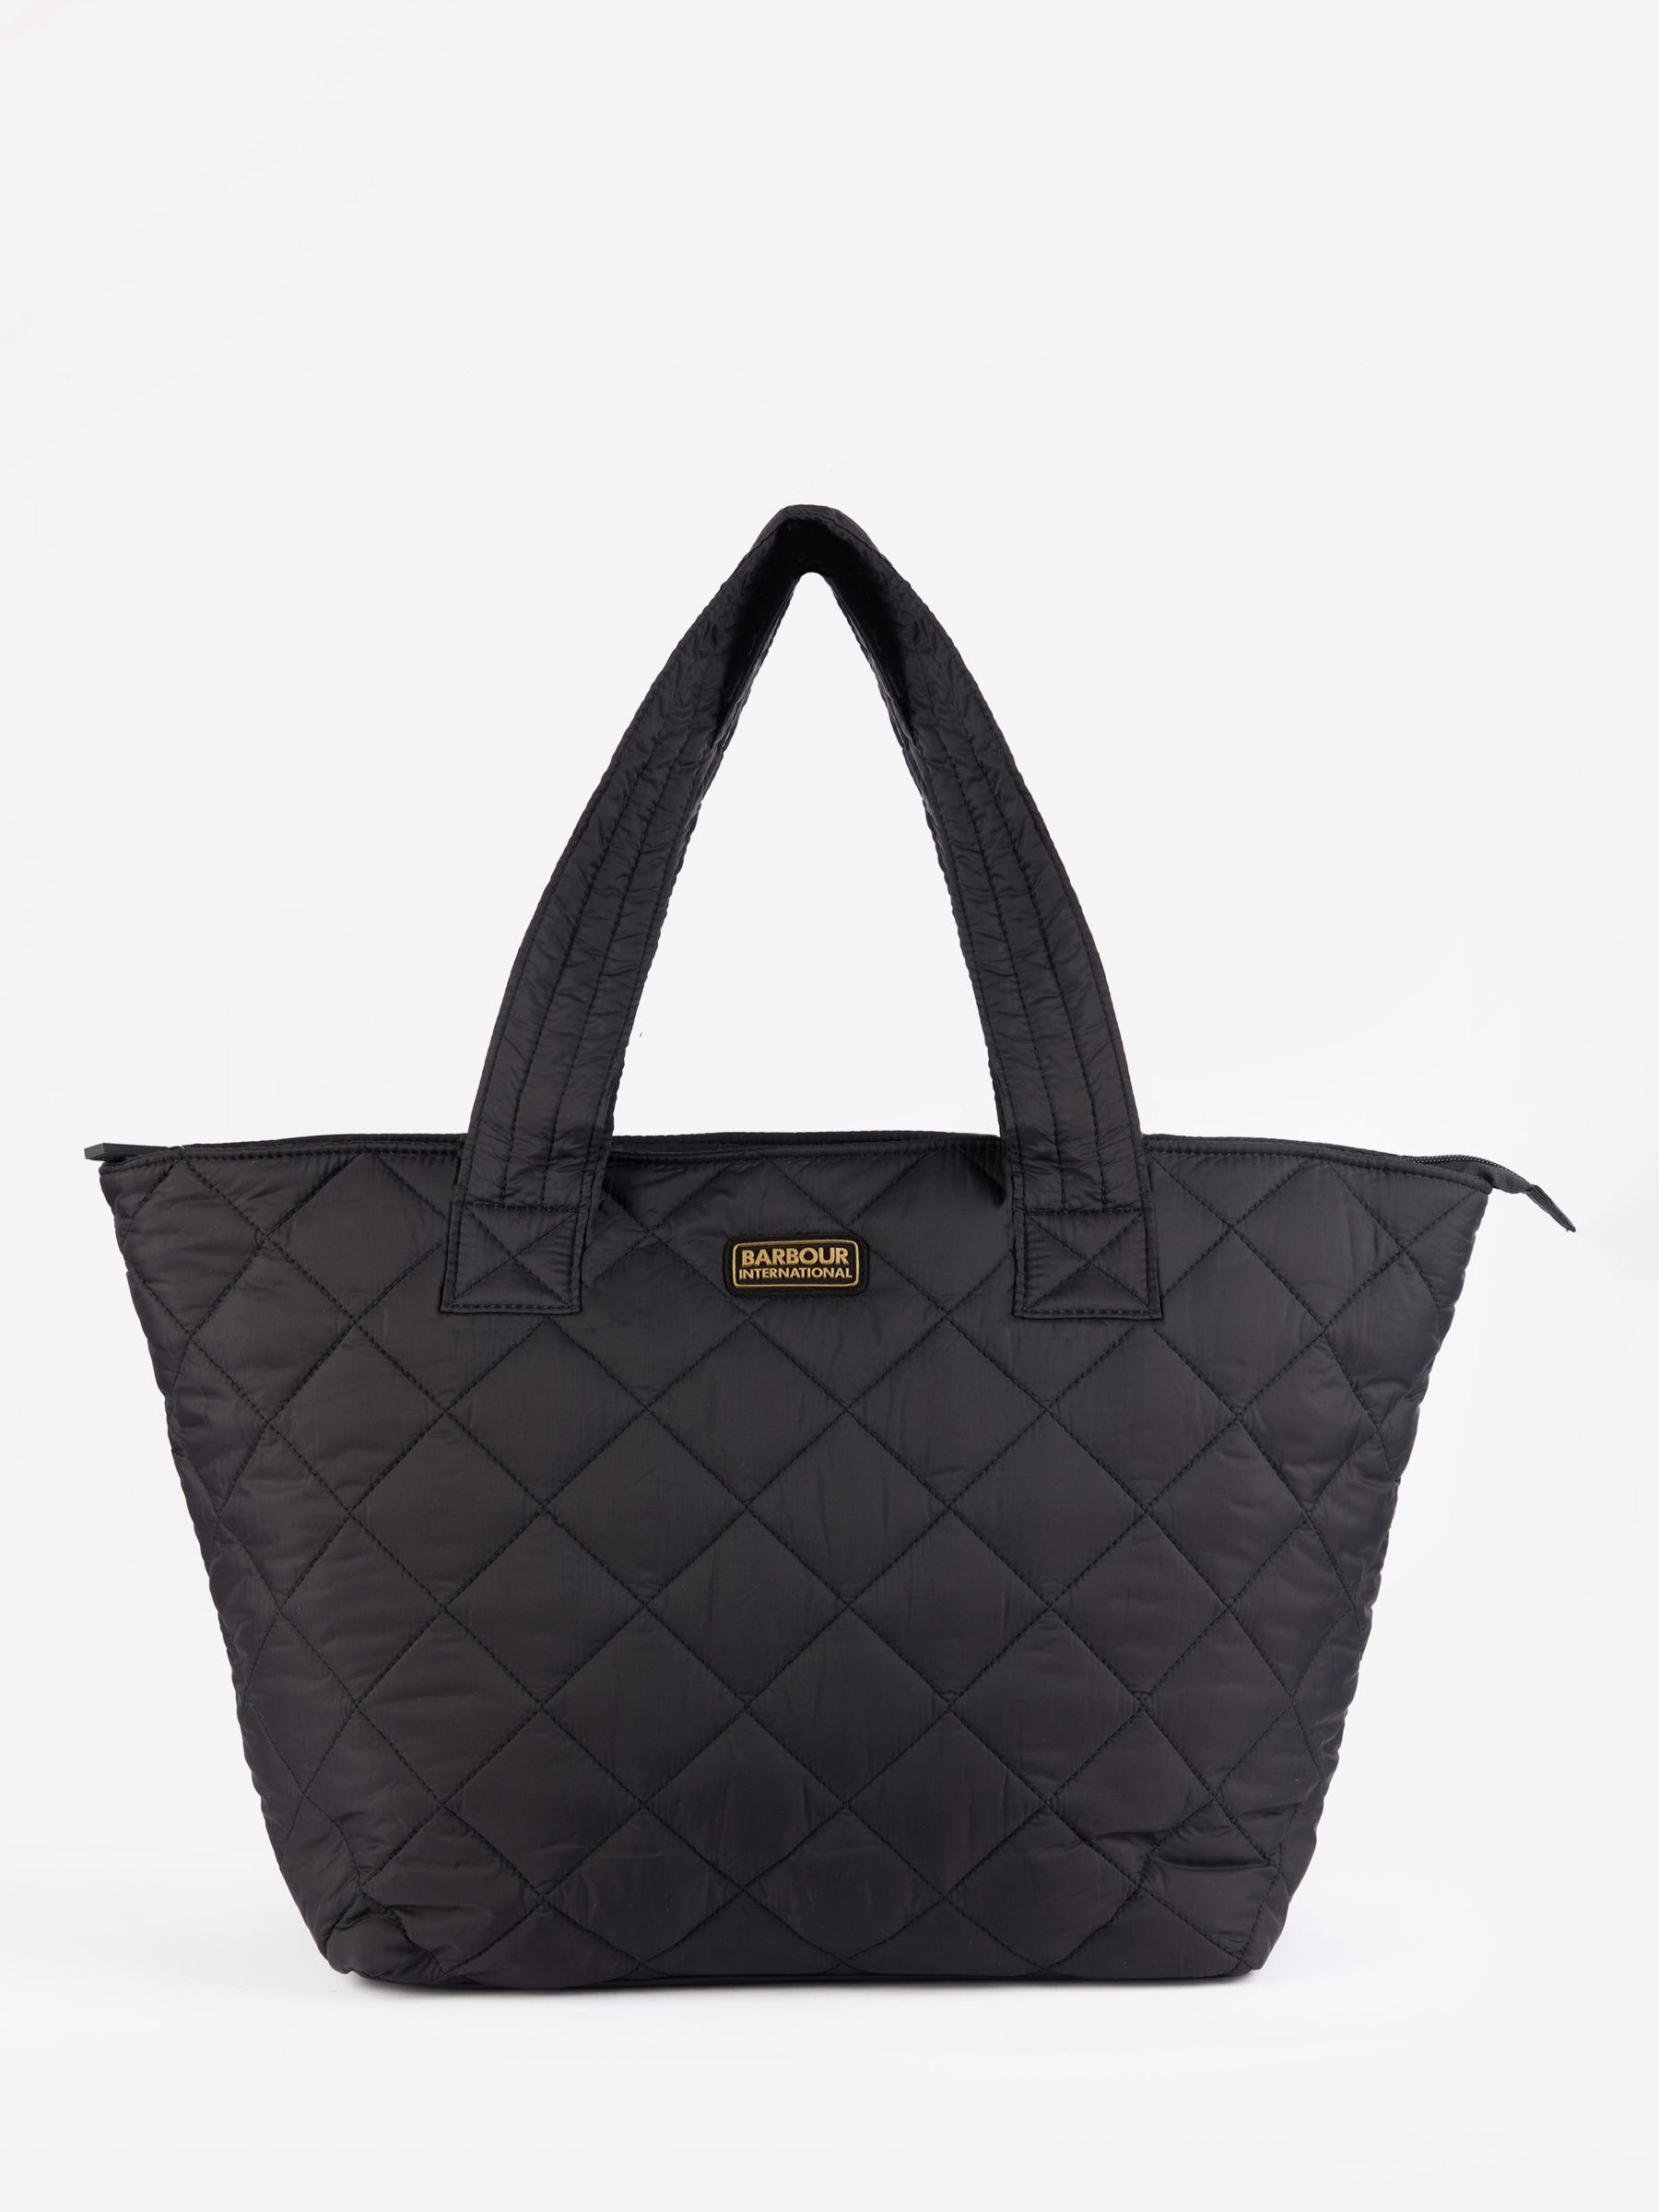 Barbour International Chicane Quilted Tote Bag, Black